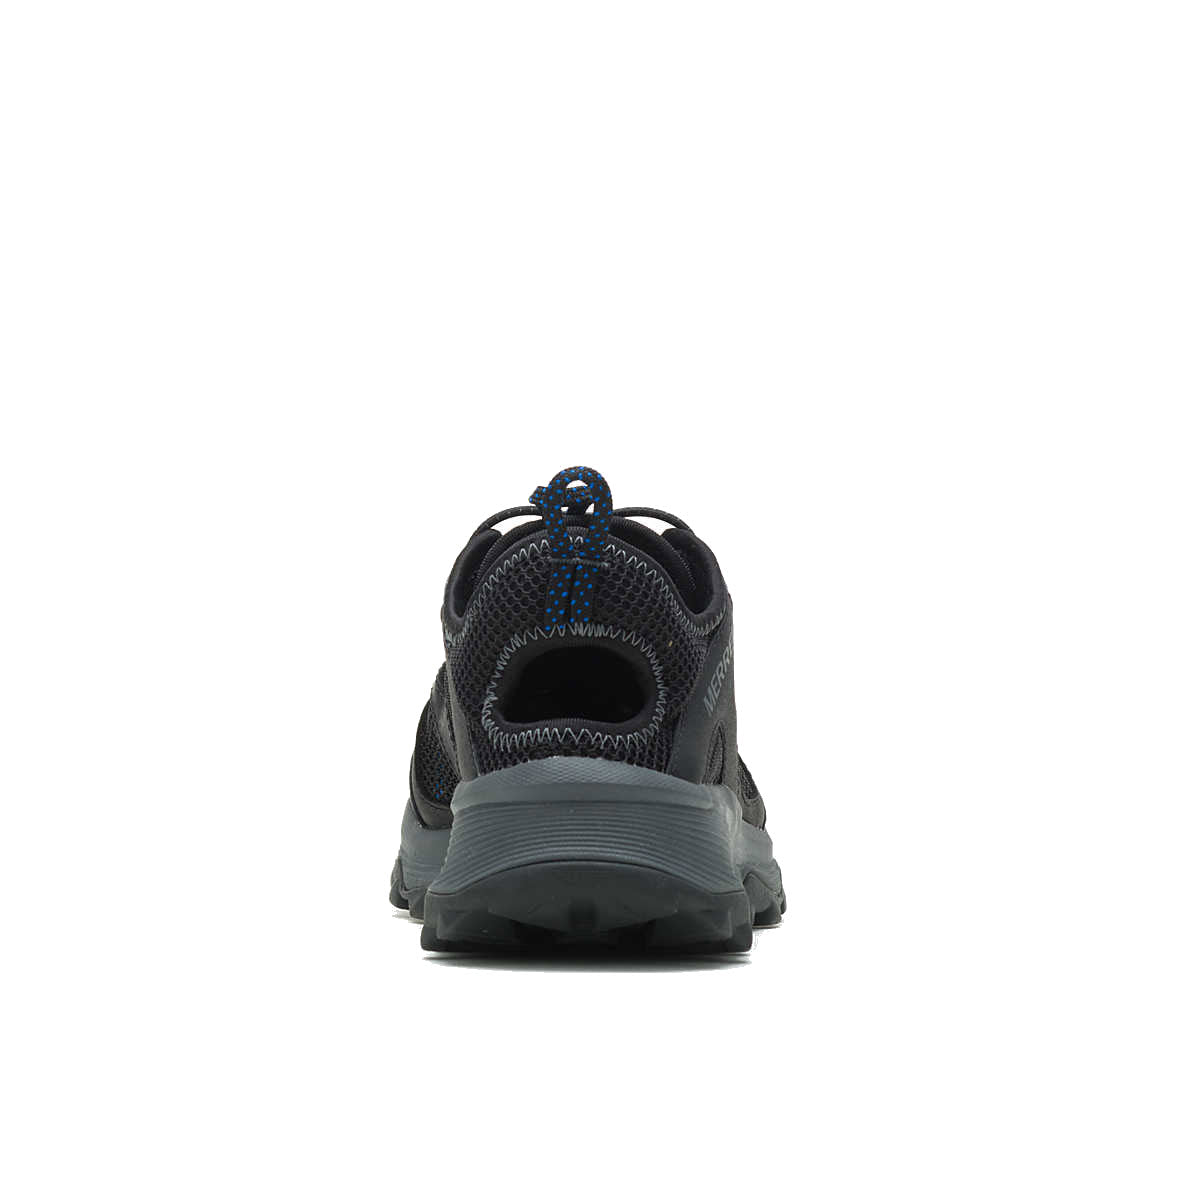 Rear view of a single Merrell Speed Strike Leather Sieve Slate Navy men&#39;s sneaker with blue details and a trail outsole, displayed against a white background.